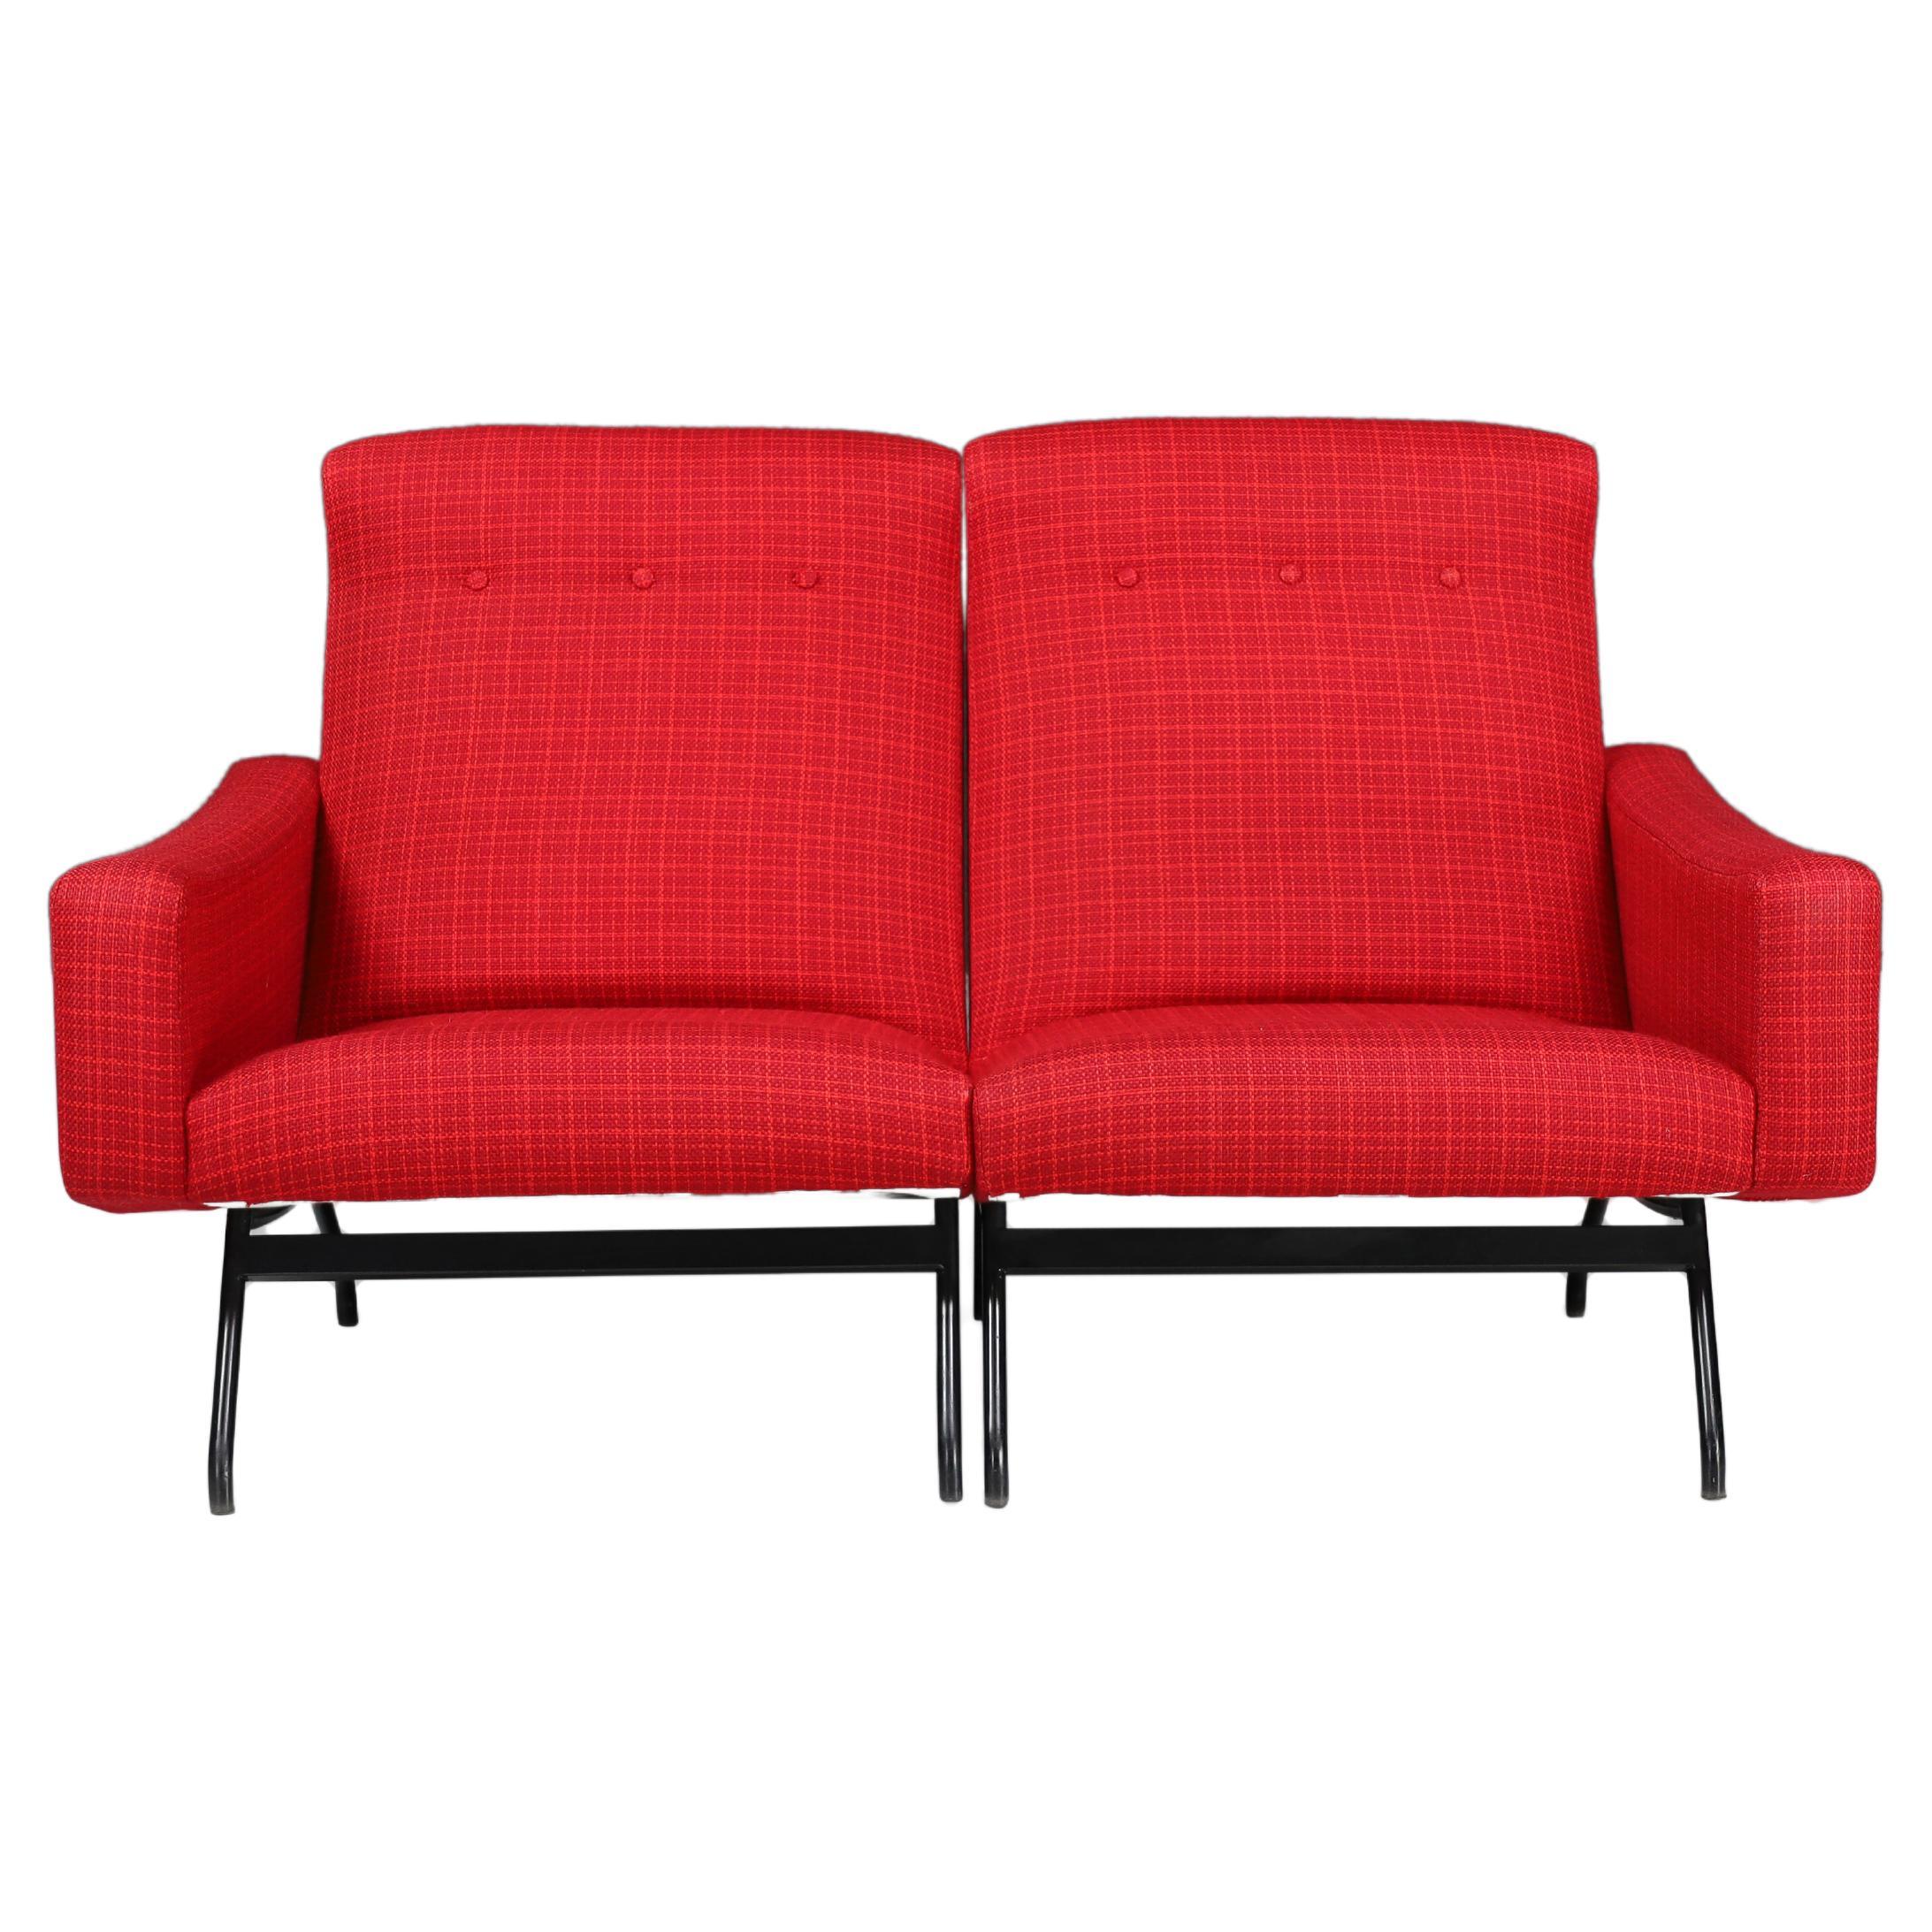 Joseph-andré Motte Sectional Sofa Two Seat Red Original Upholstery France, 1950